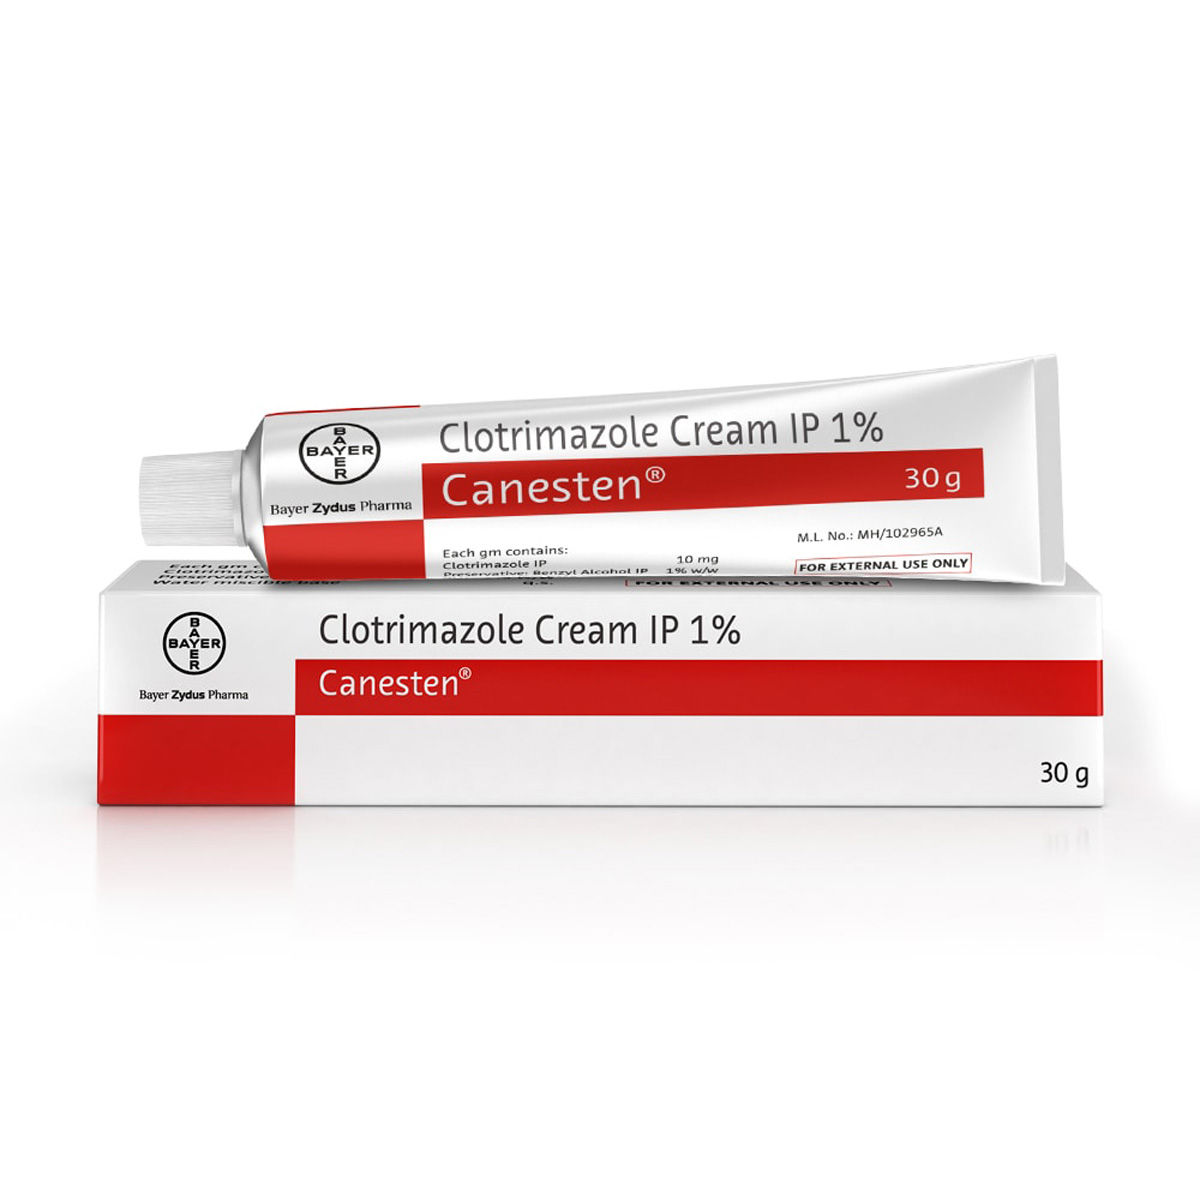 Canesten Cream 30 gm Price, Uses, Side Effects, Composition